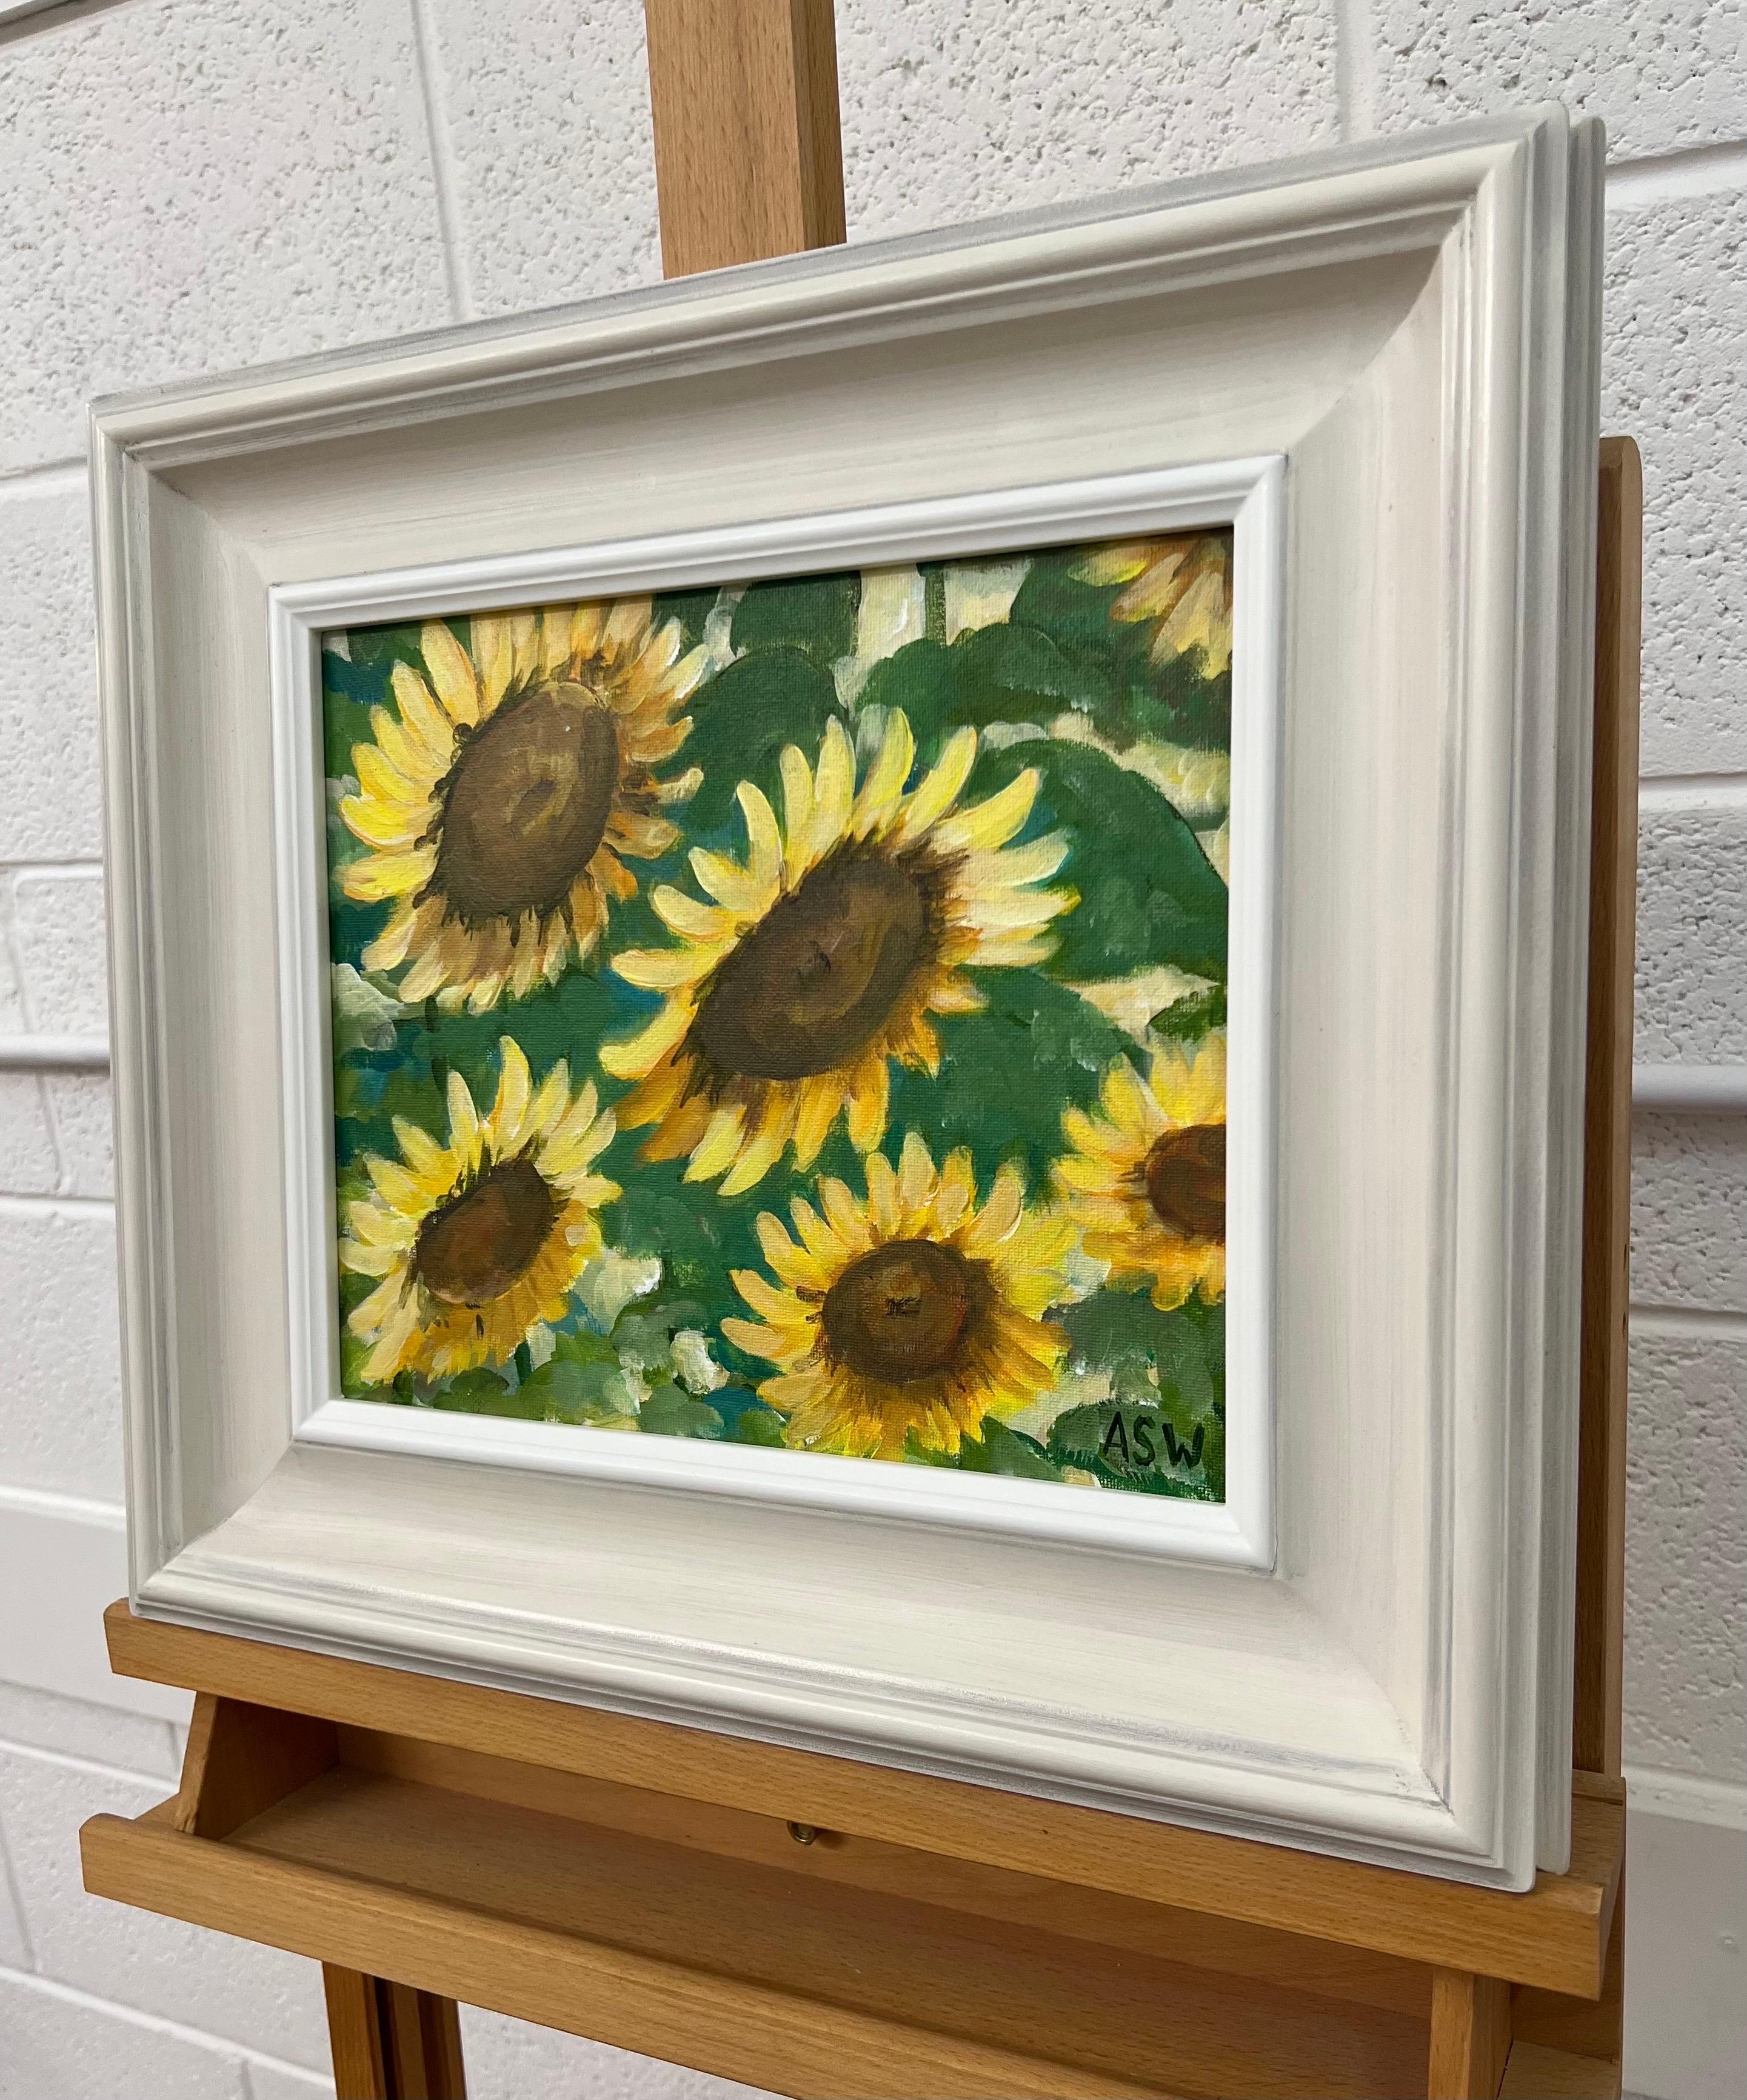 Golden Yellow Sunflowers Study on Green Background by Contemporary Artist For Sale 1